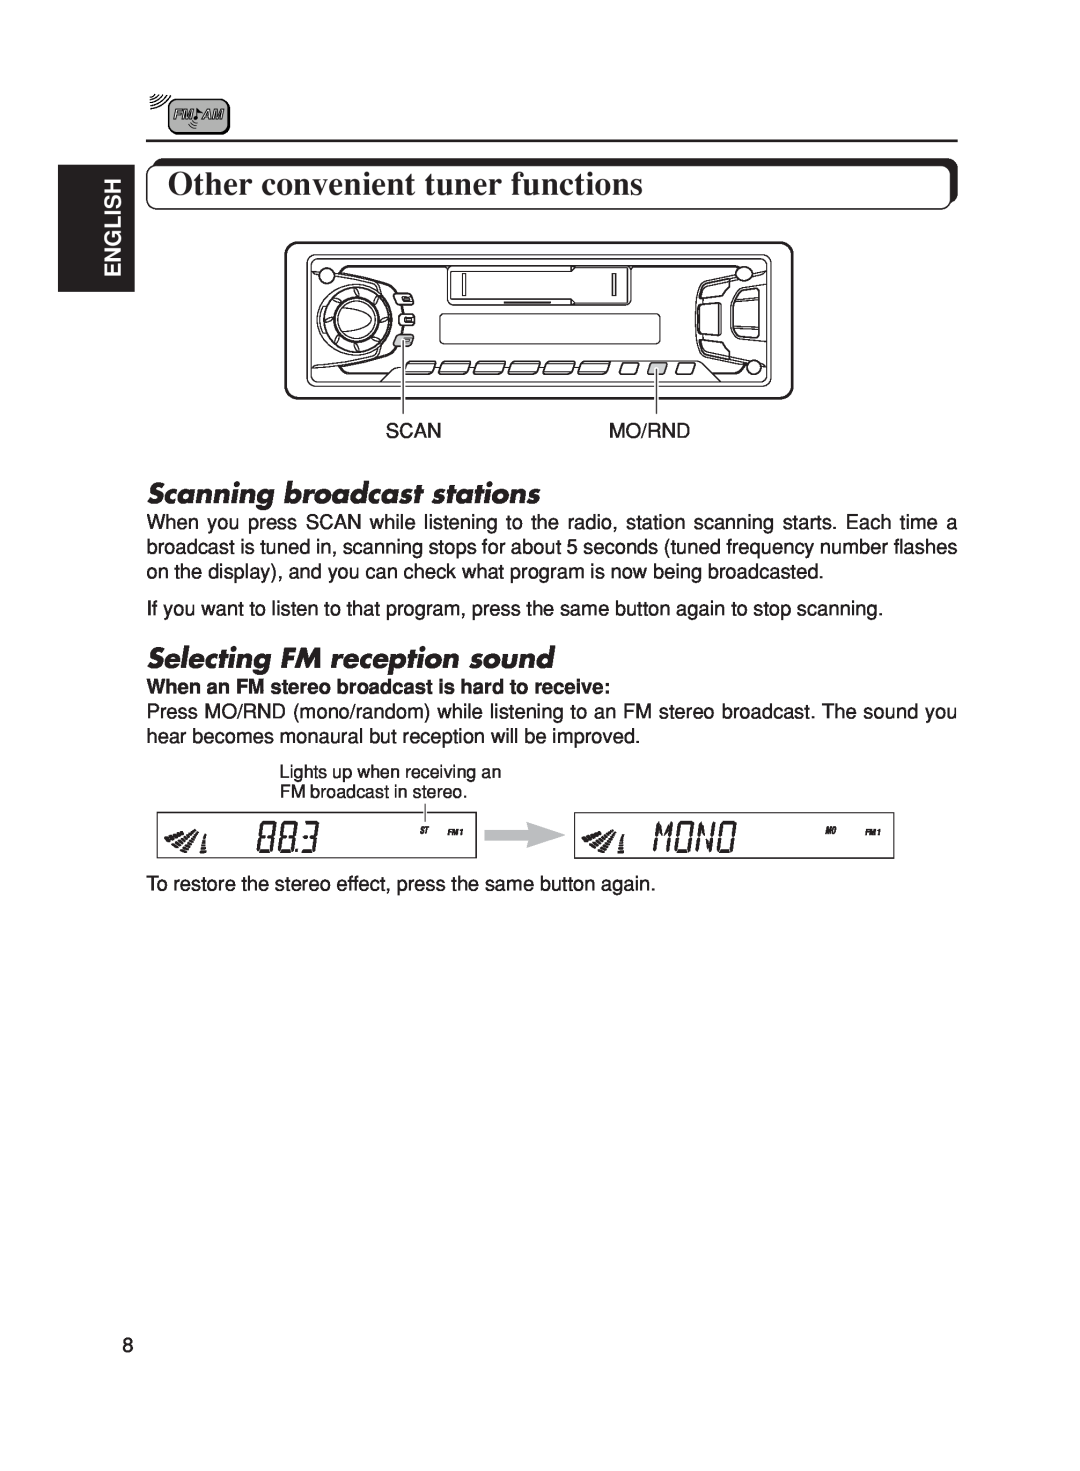 JVC KS-FX270 manual Other convenient tuner functions, Scanning broadcast stations, Selecting FM reception sound, English 